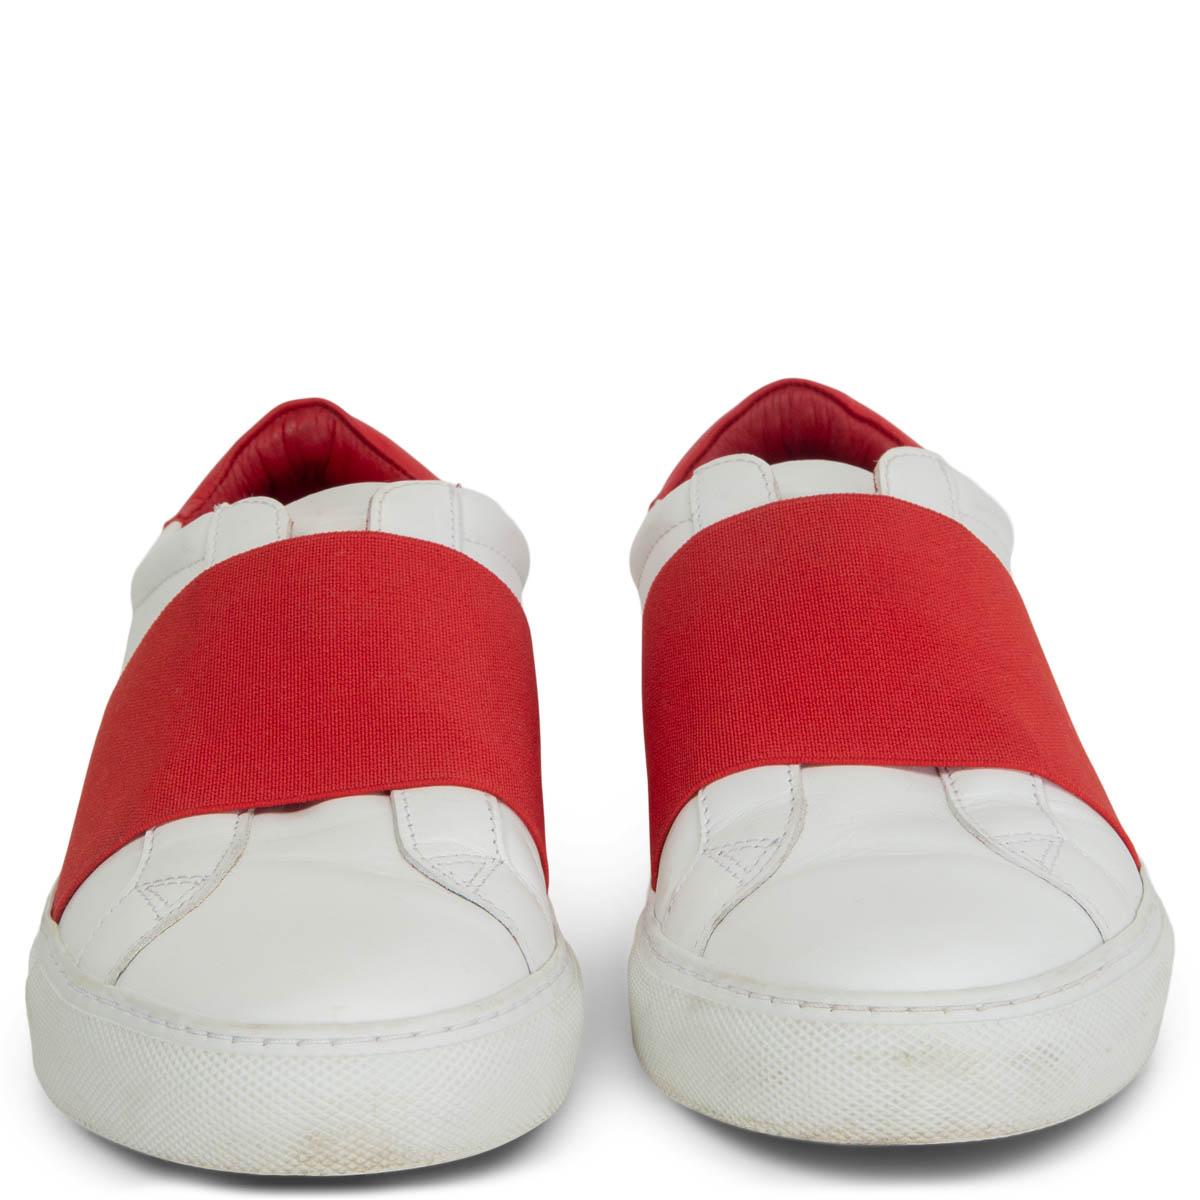 100% authentic Givenchy Urban Street low-top sneakers in white calfskin that are animated by a red elasticated strap. Gold-tone logo embossing at the heel. Red leather insole and white rubber sole. Have been worn and are in excellent condition.